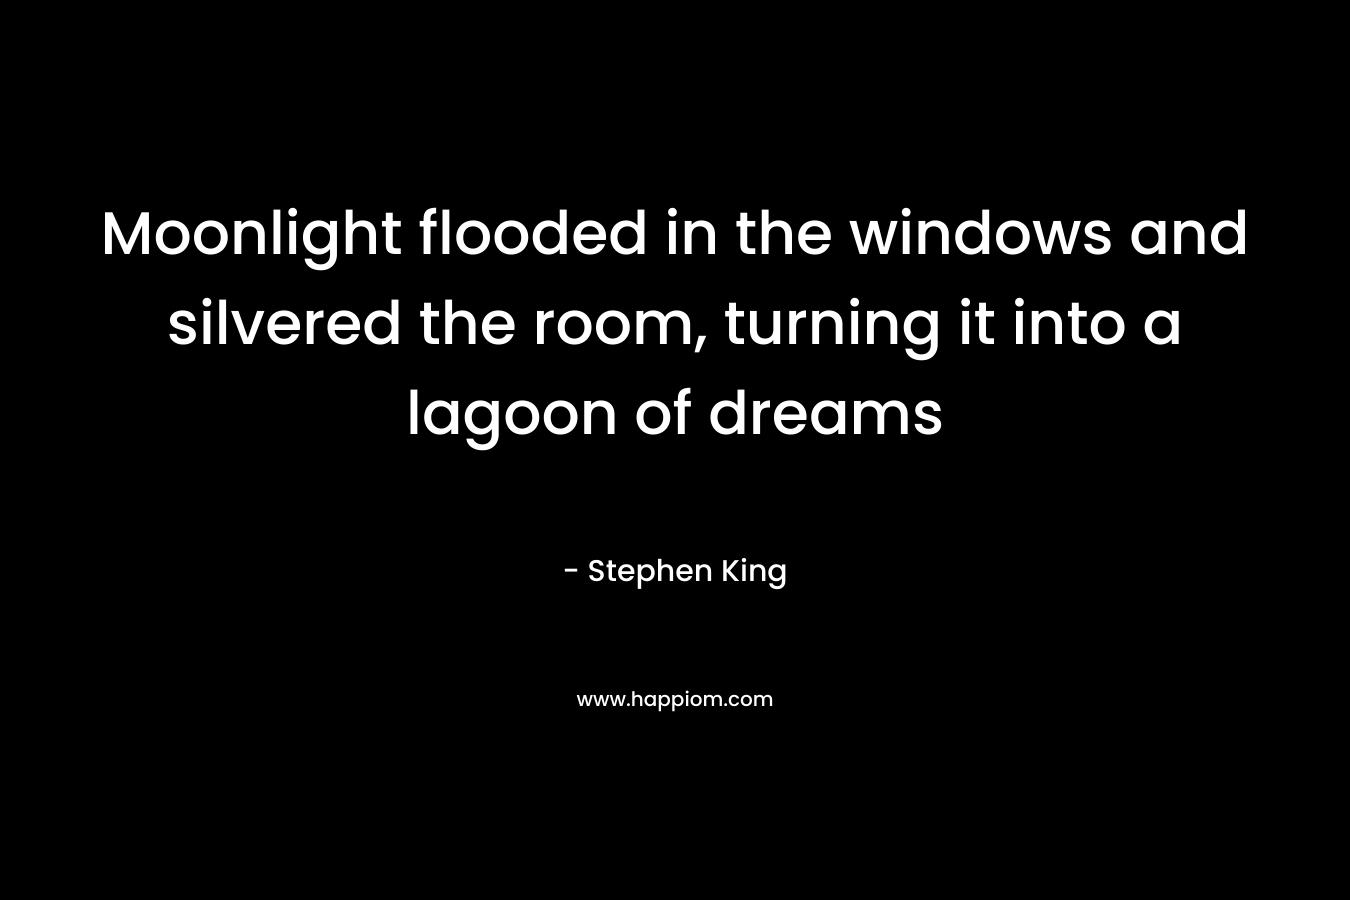 Moonlight flooded in the windows and silvered the room, turning it into a lagoon of dreams – Stephen King